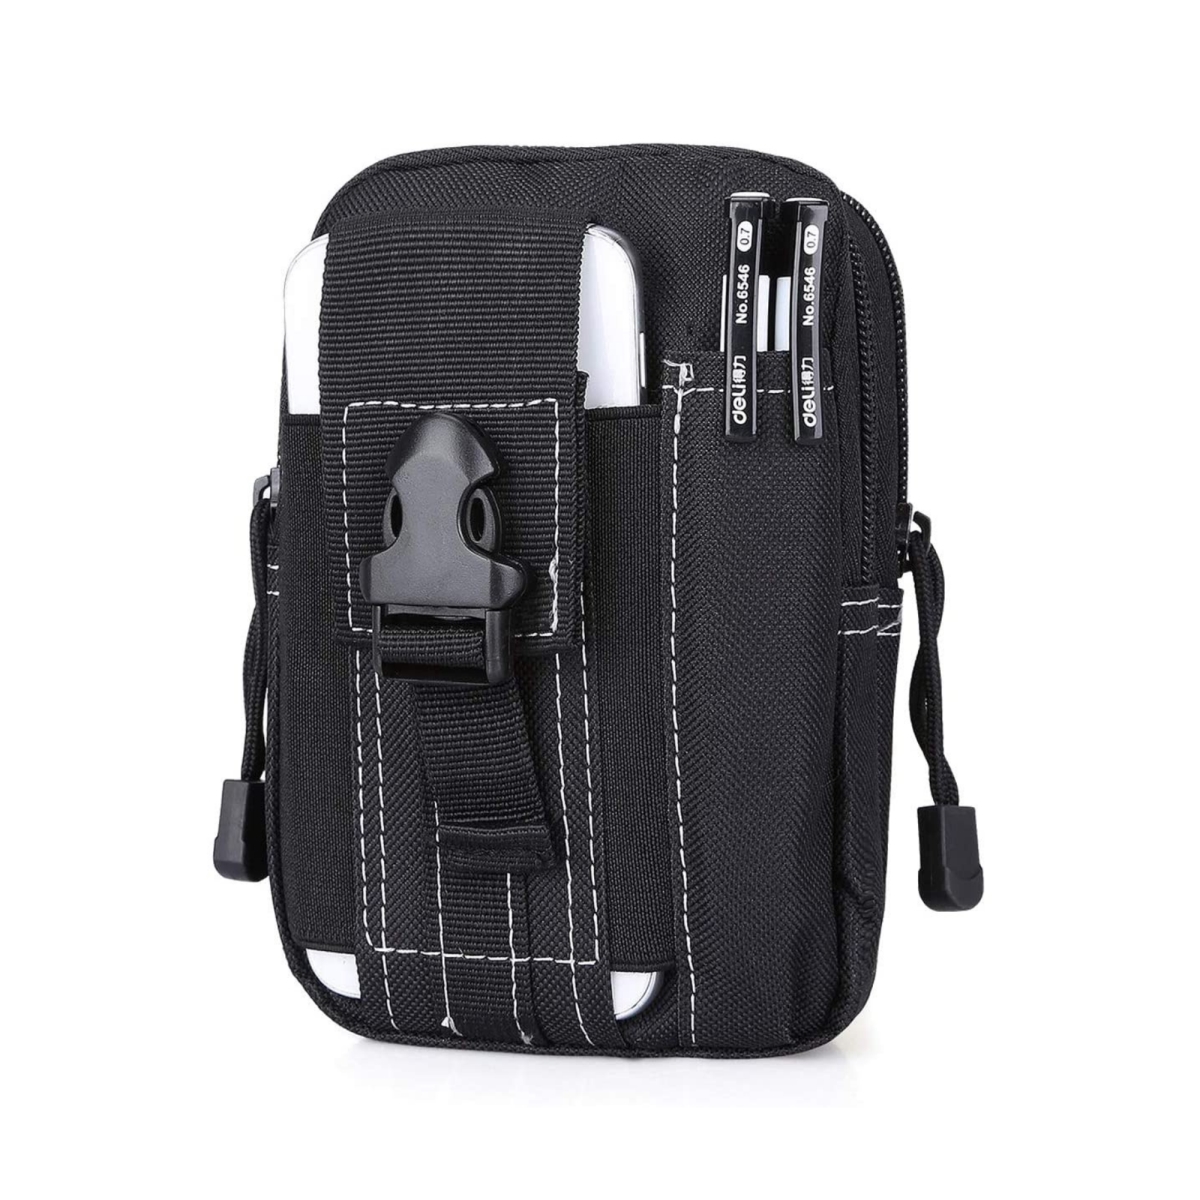 JG-SLNGBAG2-BLKWHT Tactical MOLLE Military Pouch Waist Bag for Hiking, Running & Outdoor Activities, Black & White